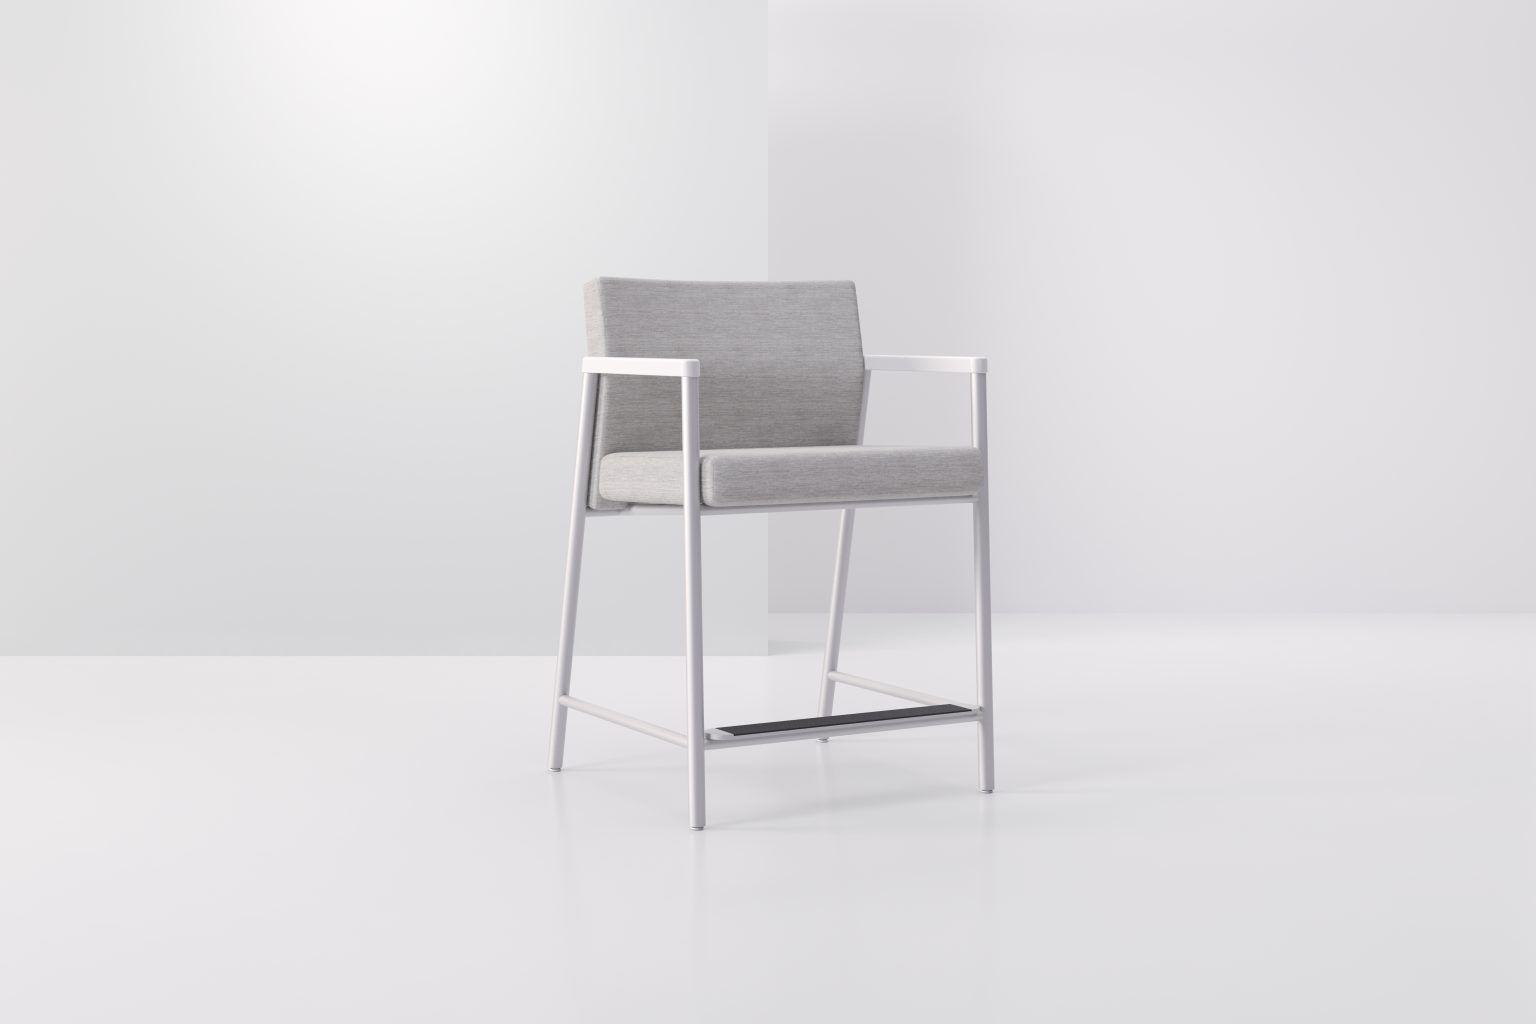 Altos Easy Access Chair Product Image 1